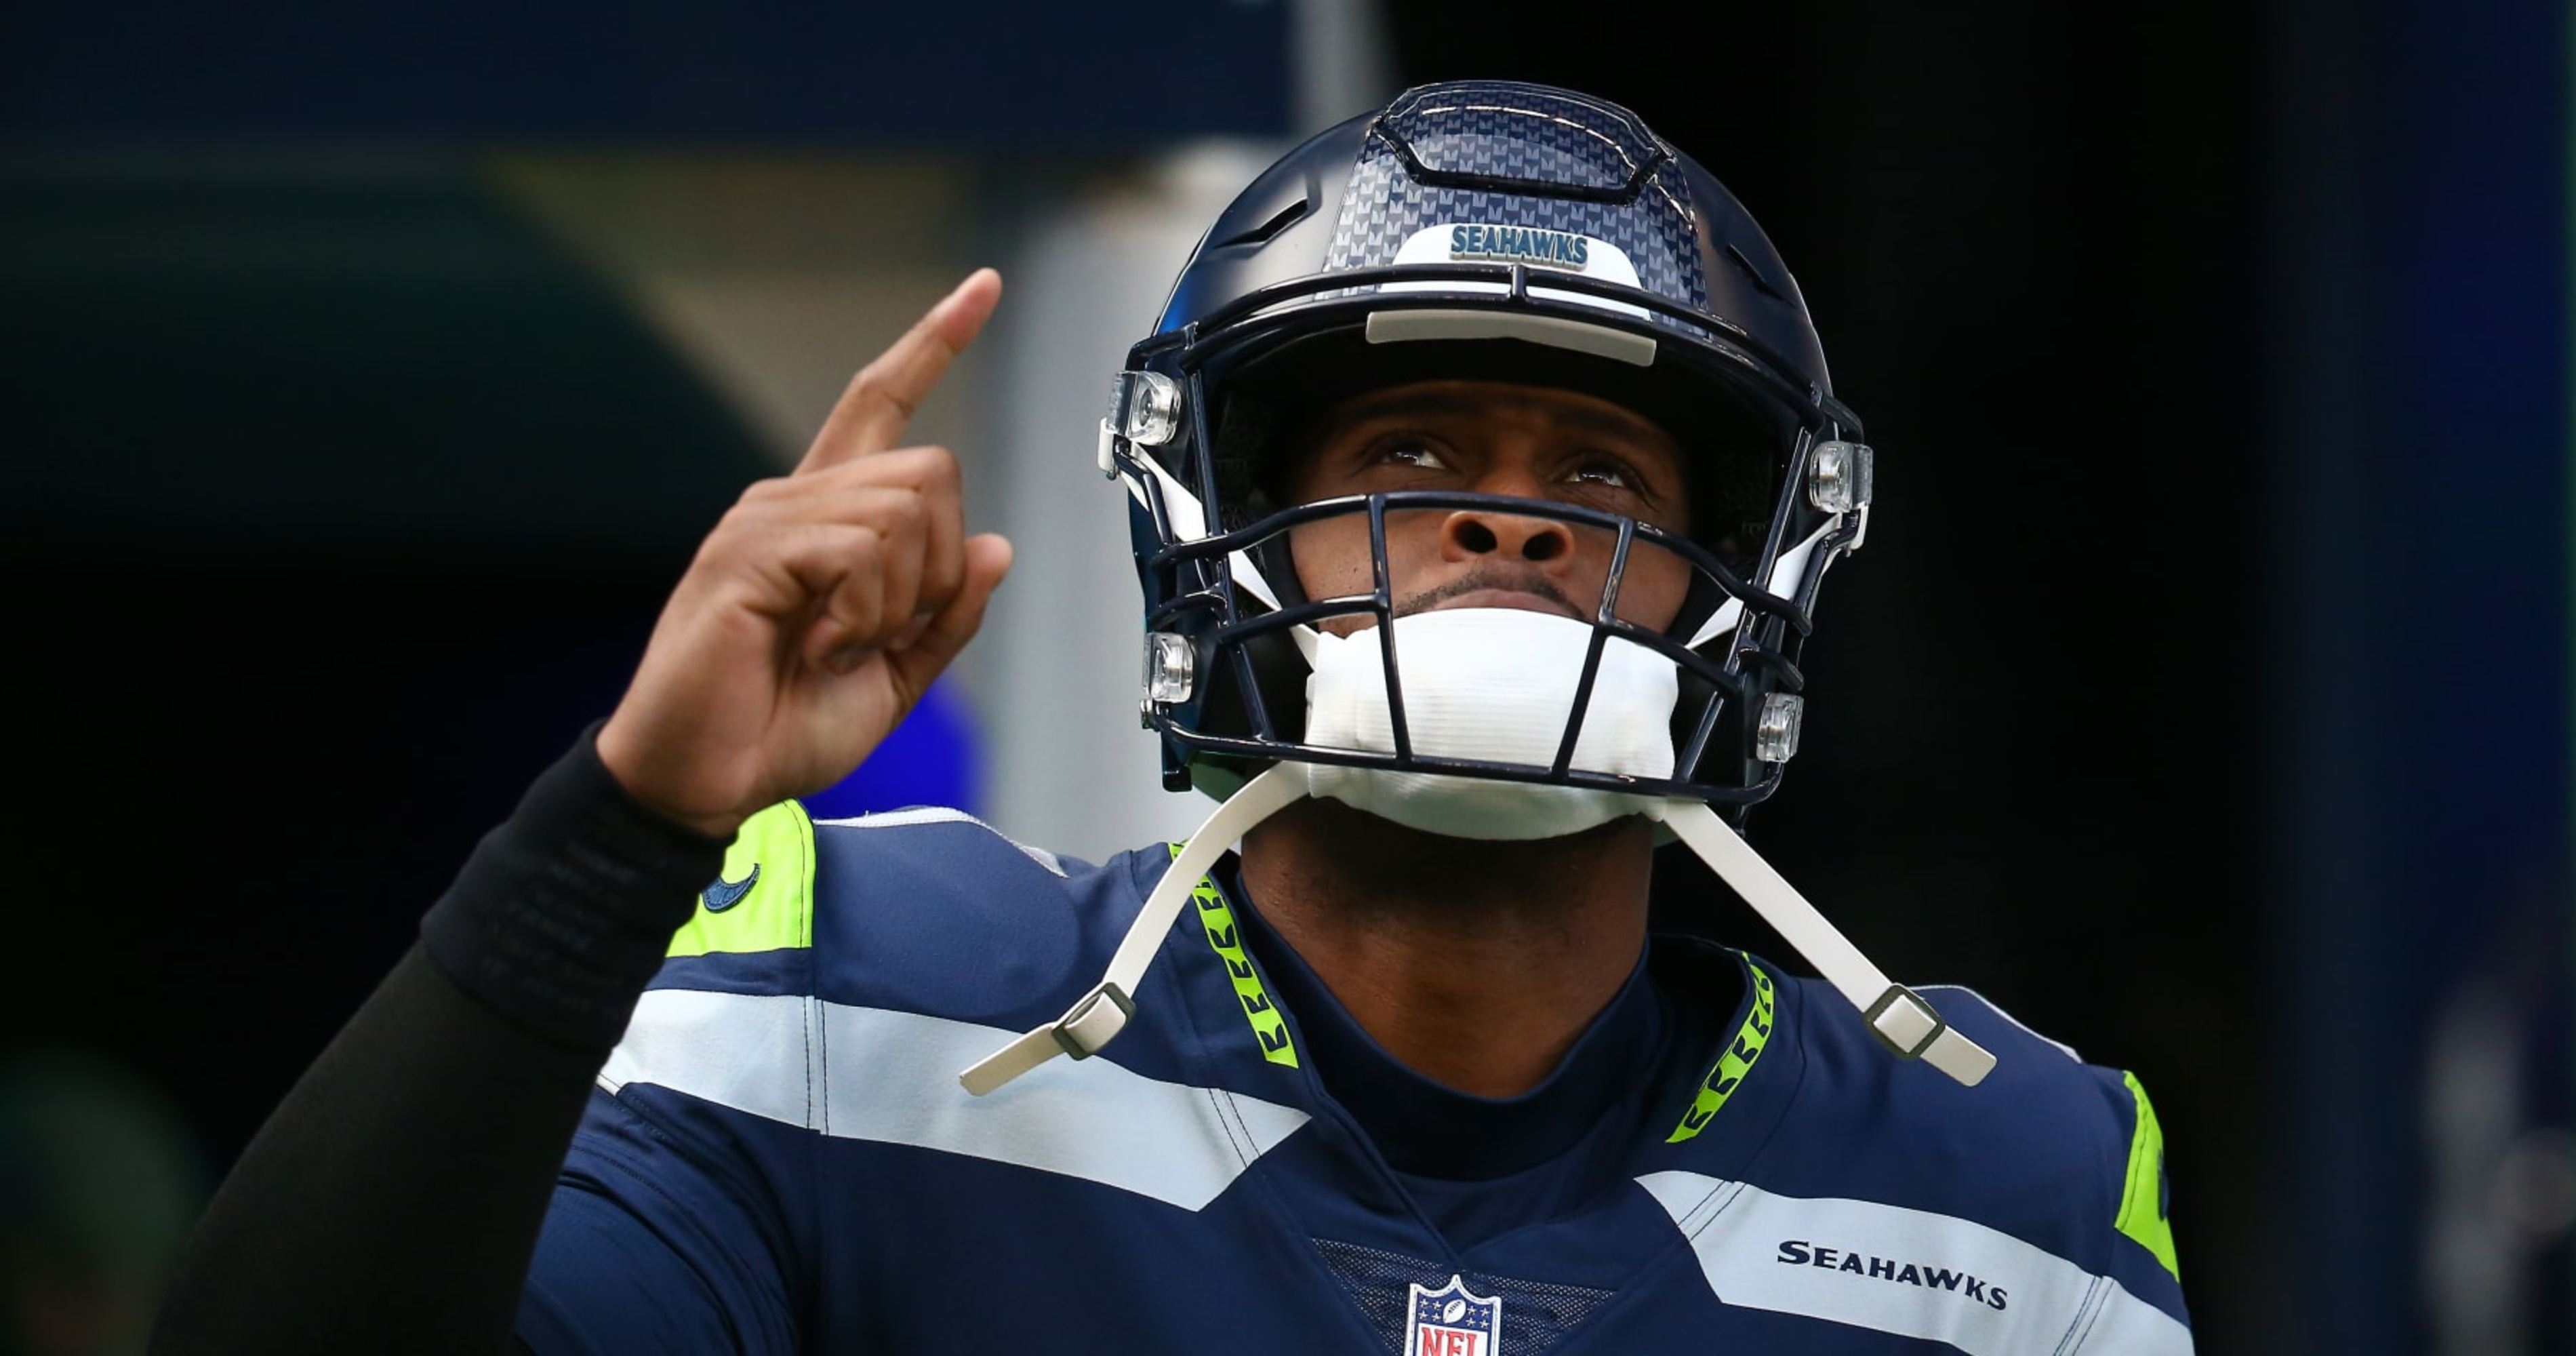 Seahawks' Geno Smith Earns $1M Contract Bonus After Eclipsing 4K Passing Yards